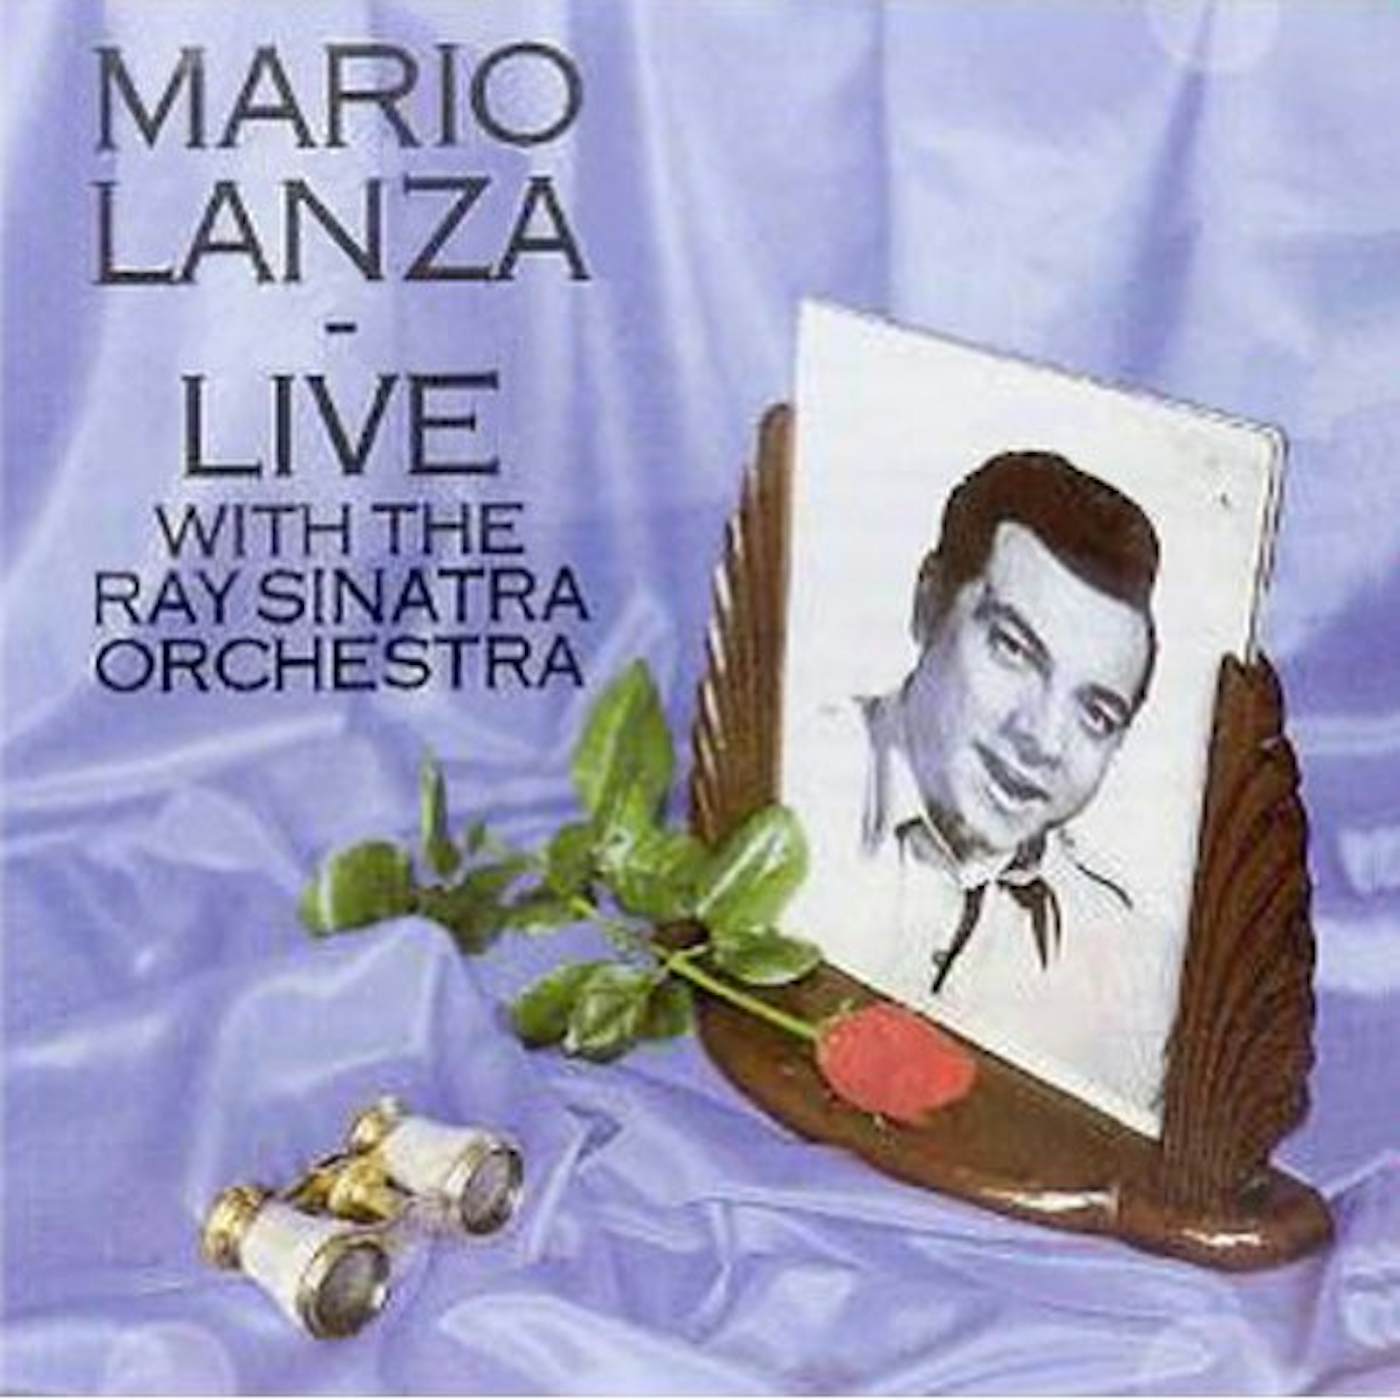 Mario Lanza LIVE WITH THE RAY SINATRA ORCHESTRA CD